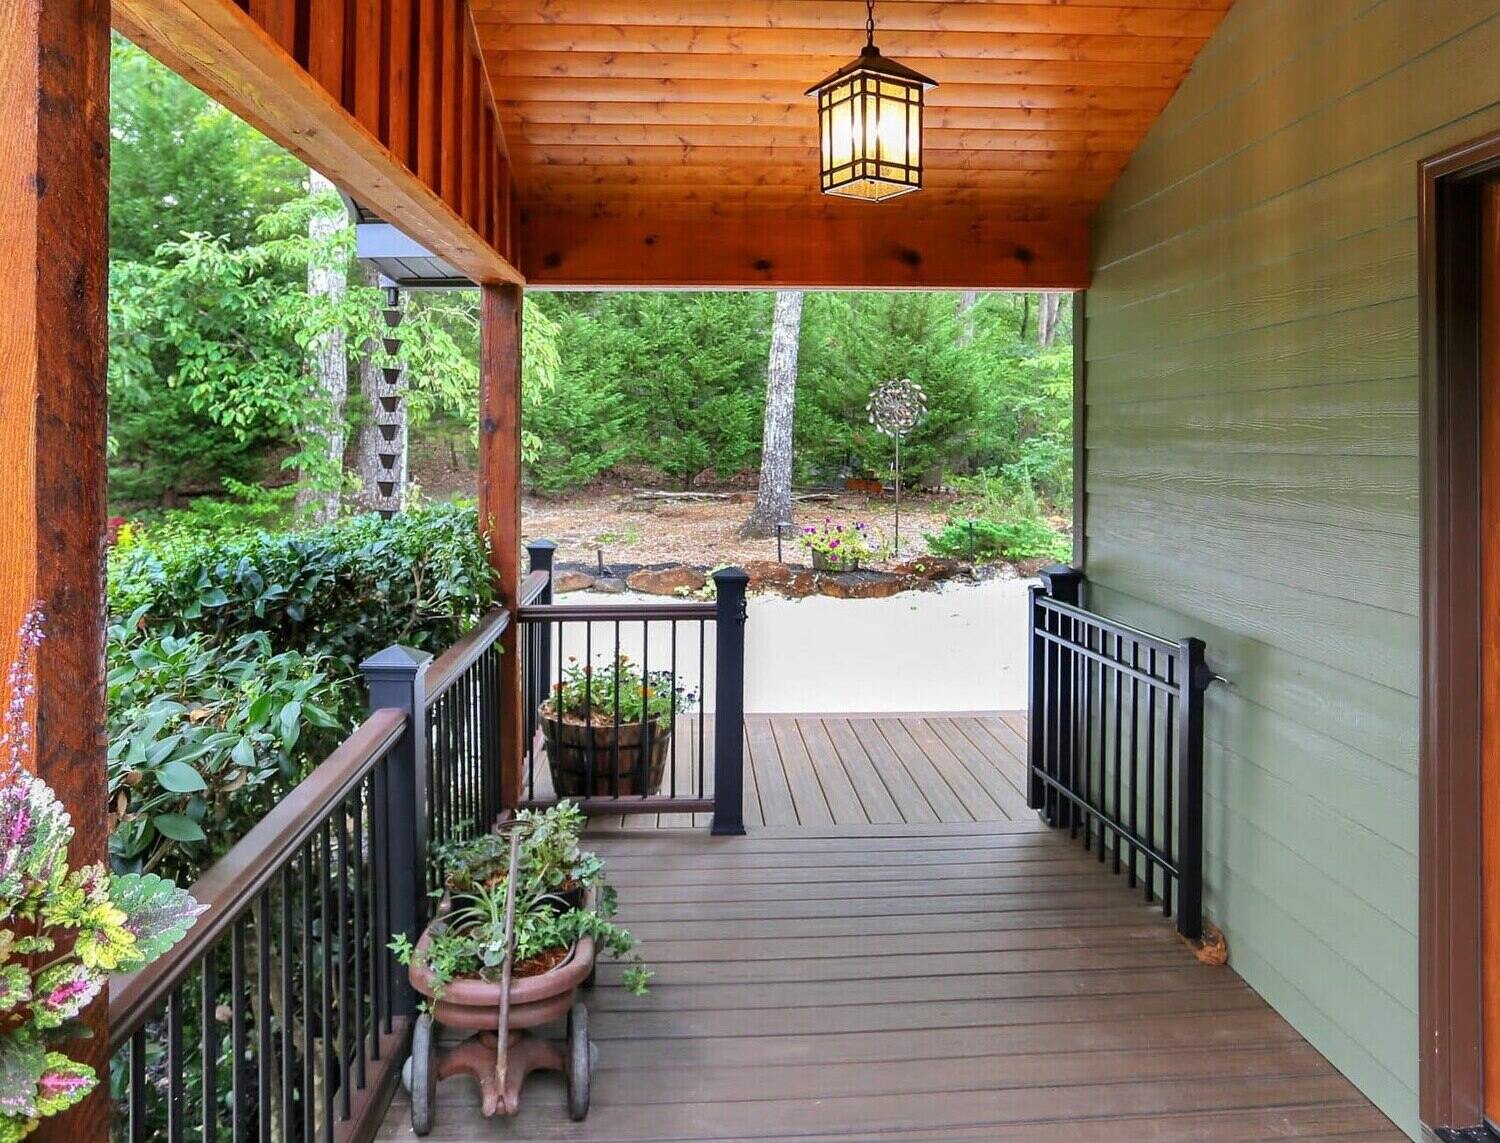 How To Build Covered Porch